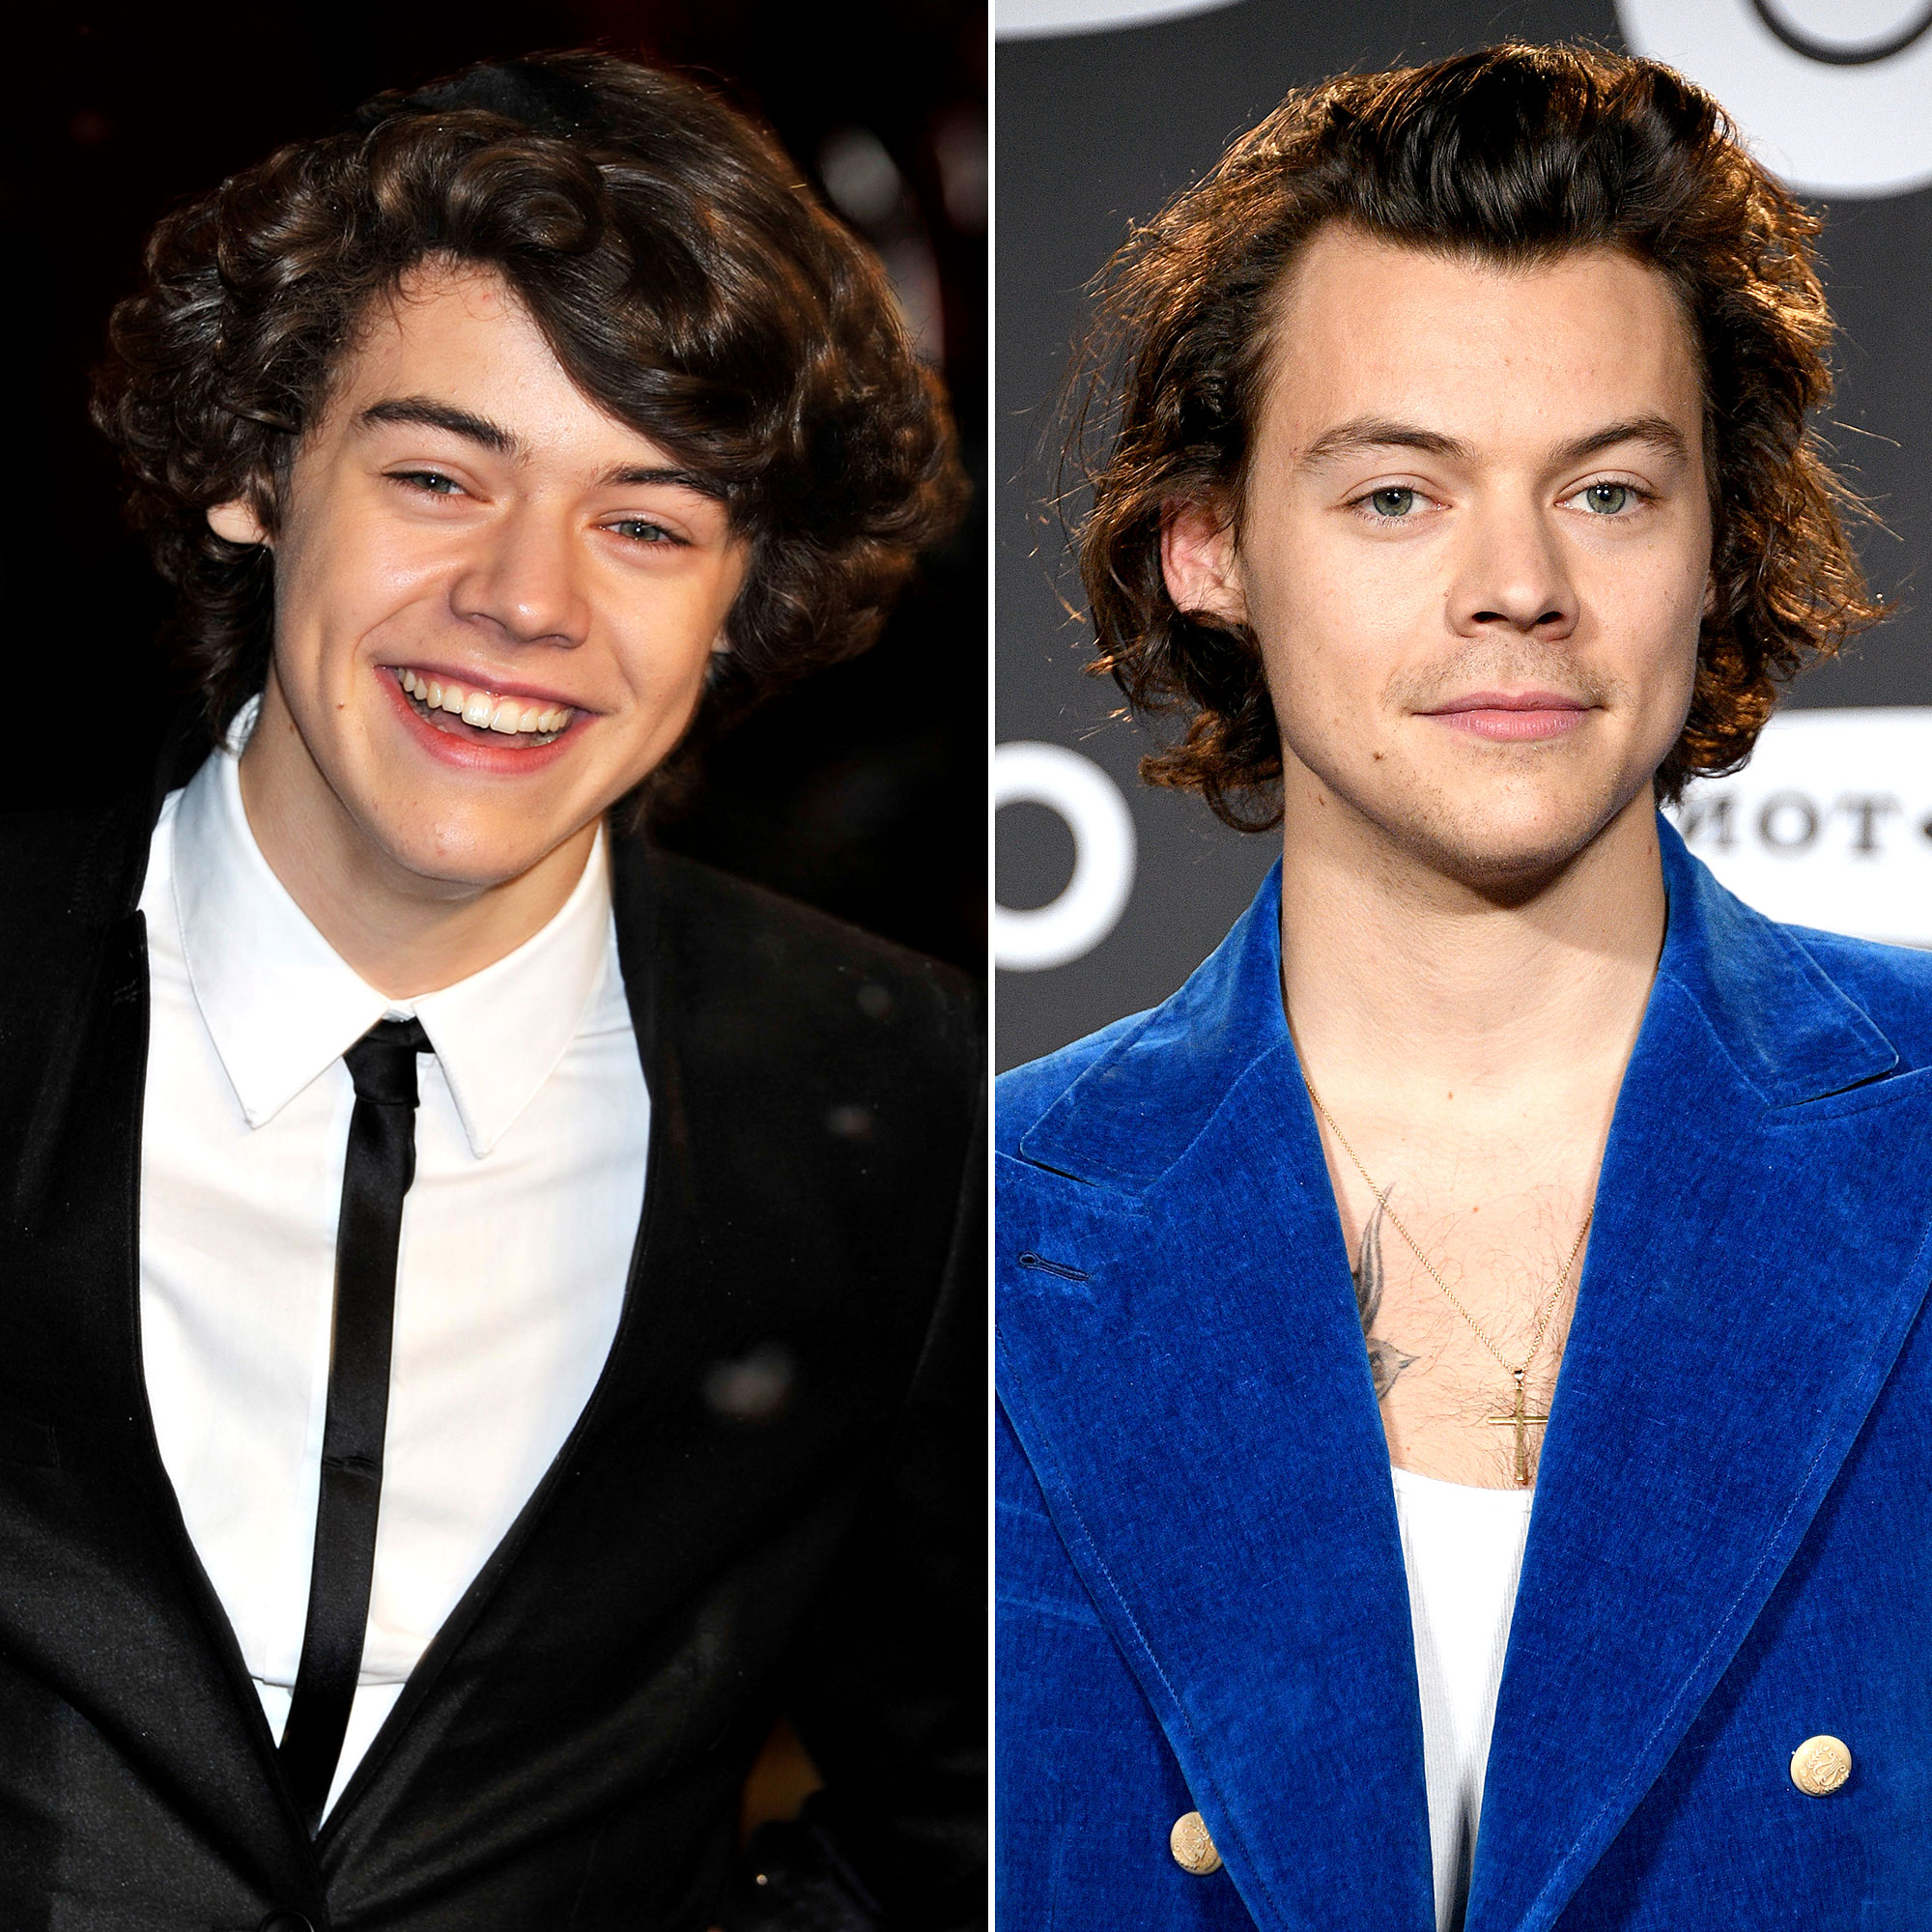 Former One Direction Members Where Are They Now